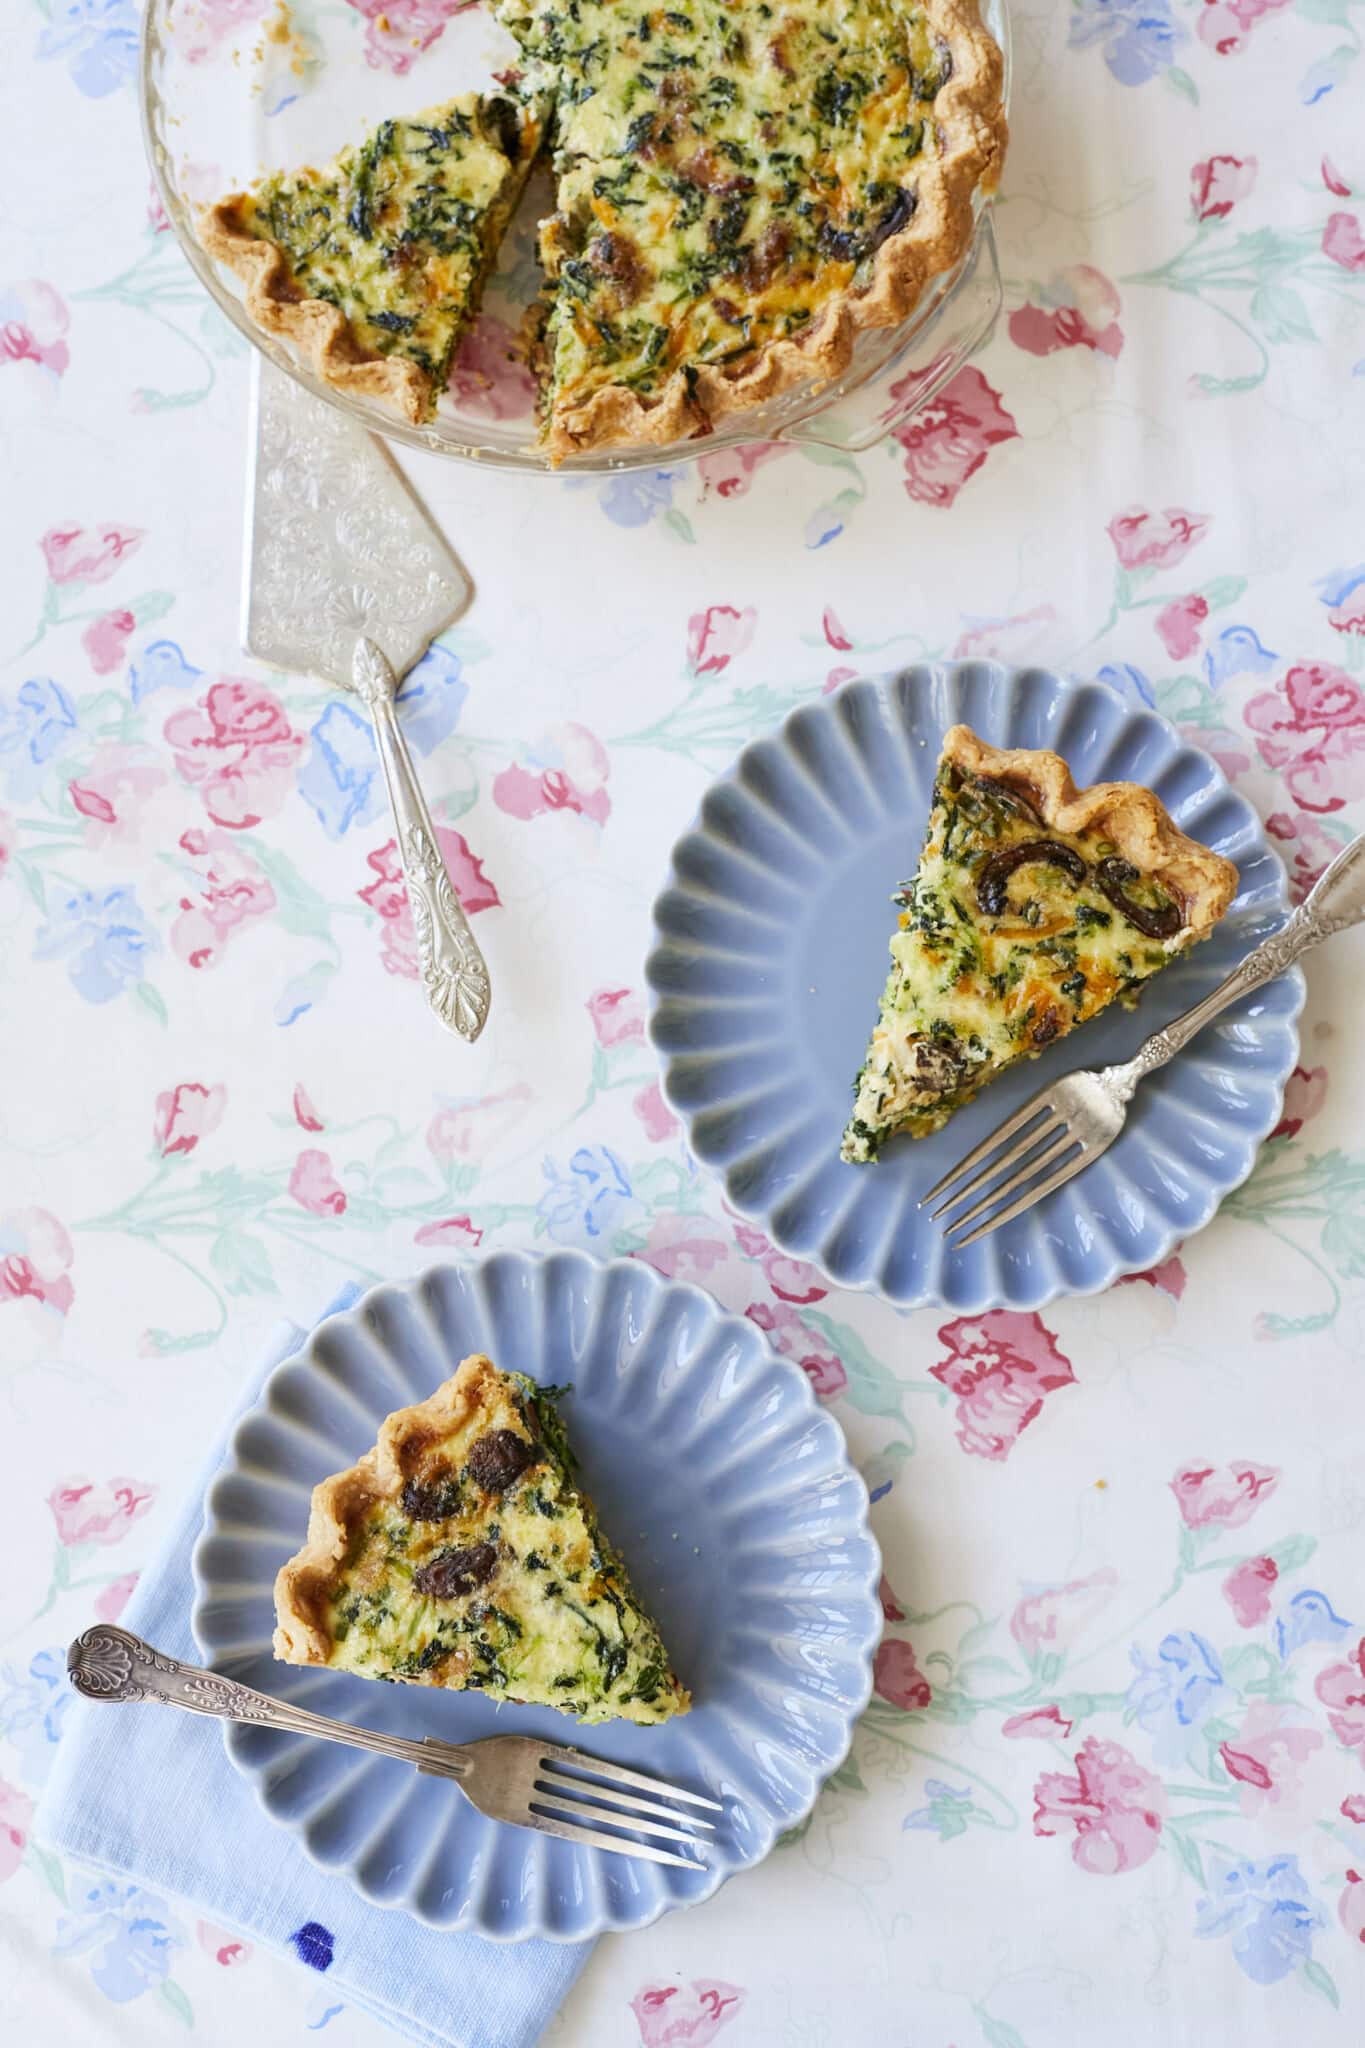 Two slices of homemade quiche are served on blue plates beneath the rest of the quiche, which rests in the baking dish.